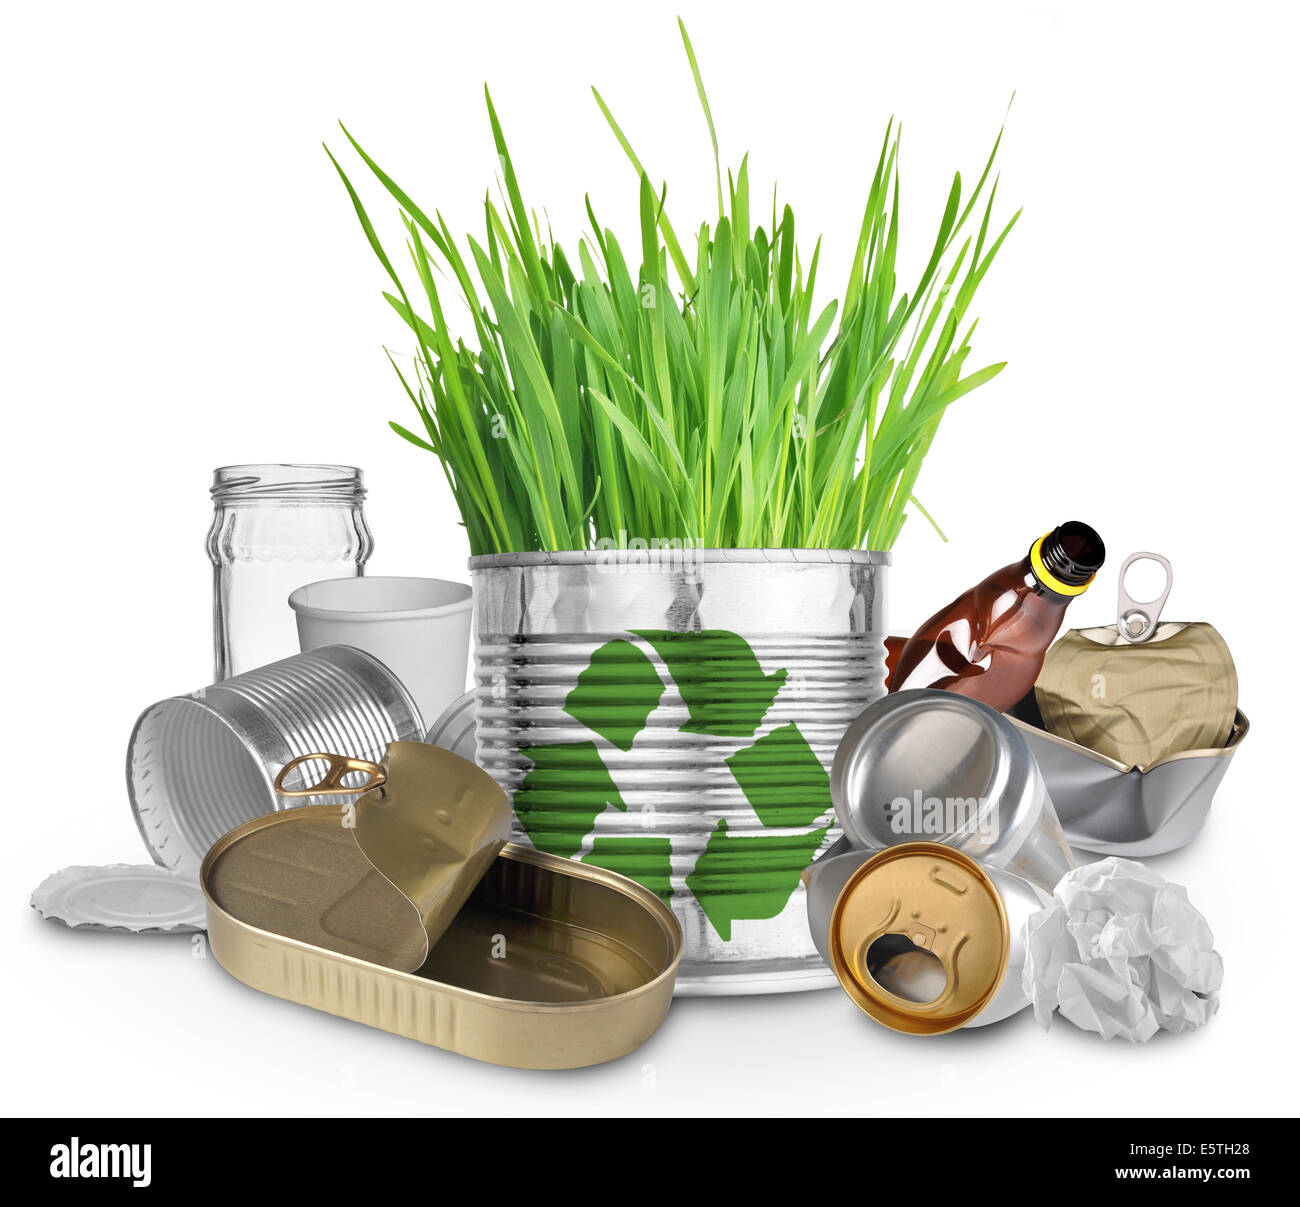 Can with growing grass and trash for recycle Stock Photo